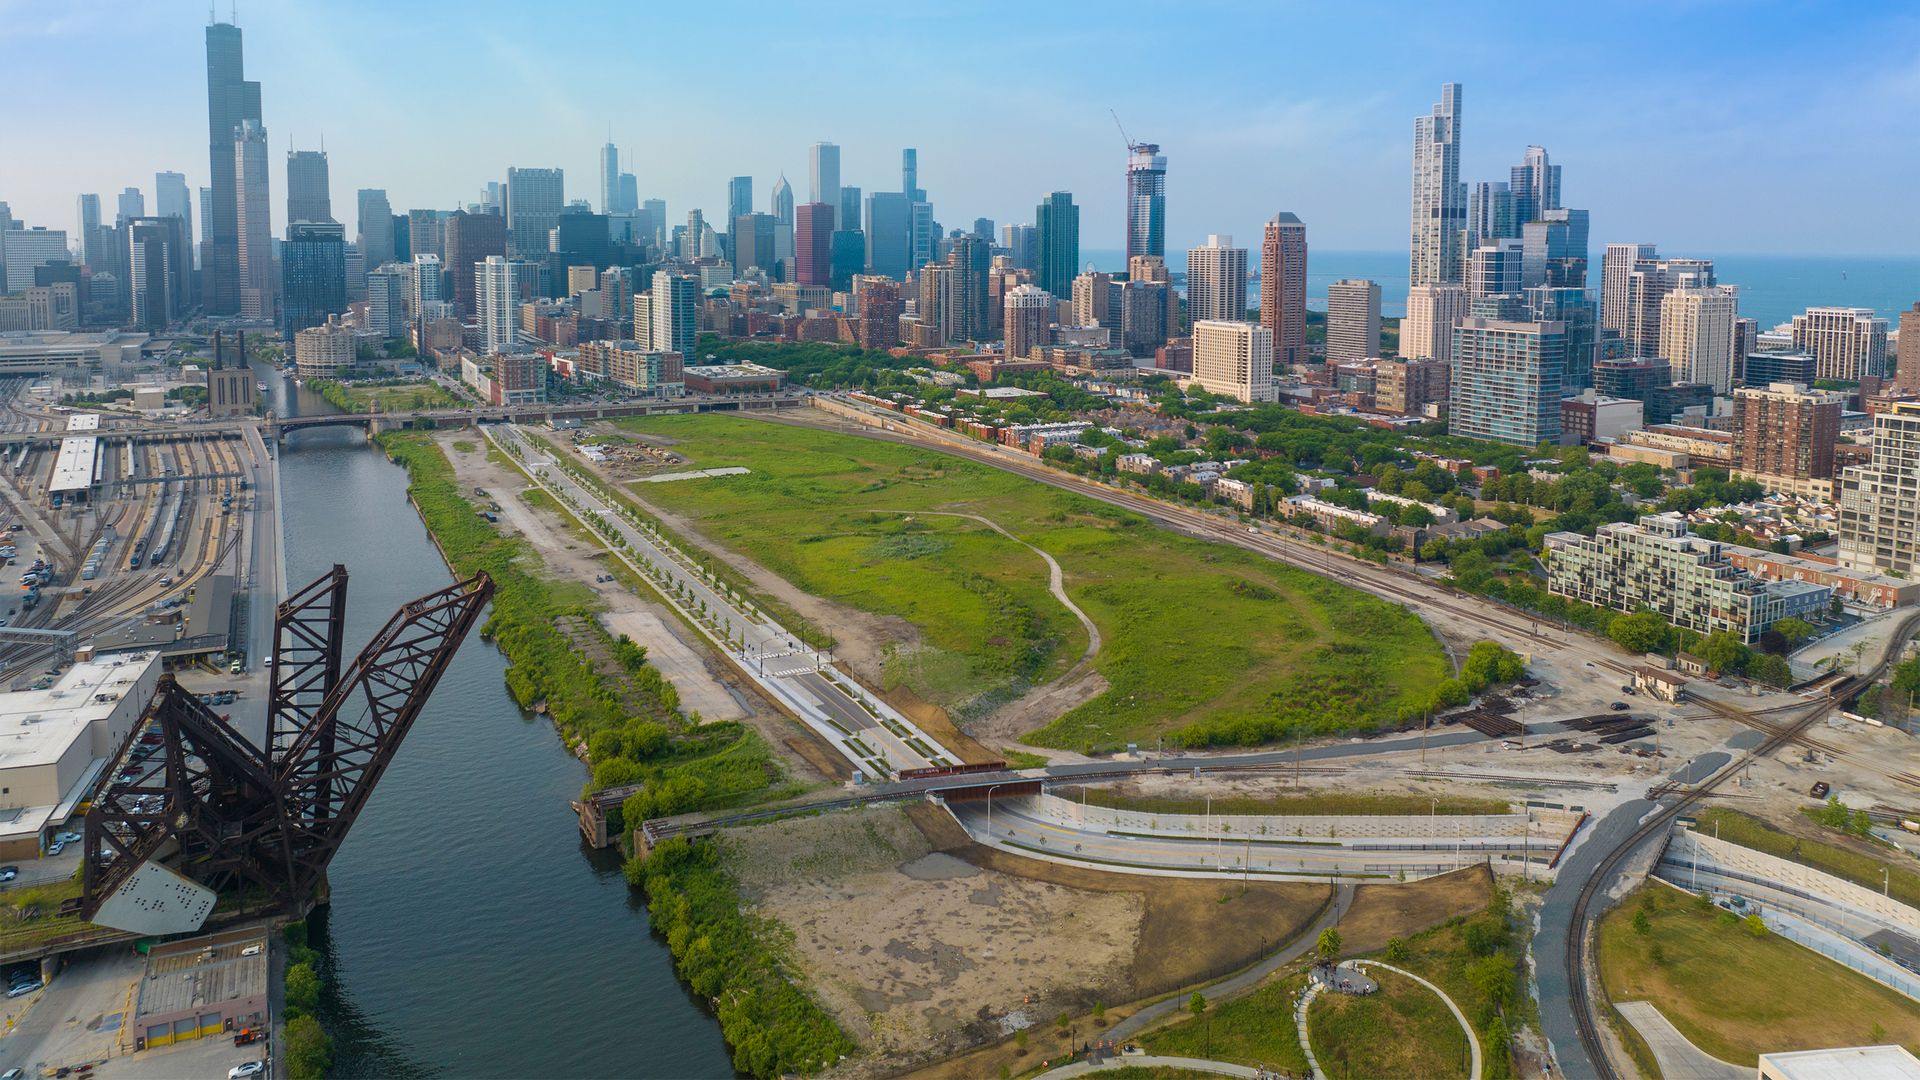 Aerial view of Chicago skyline with grass, streets and river.